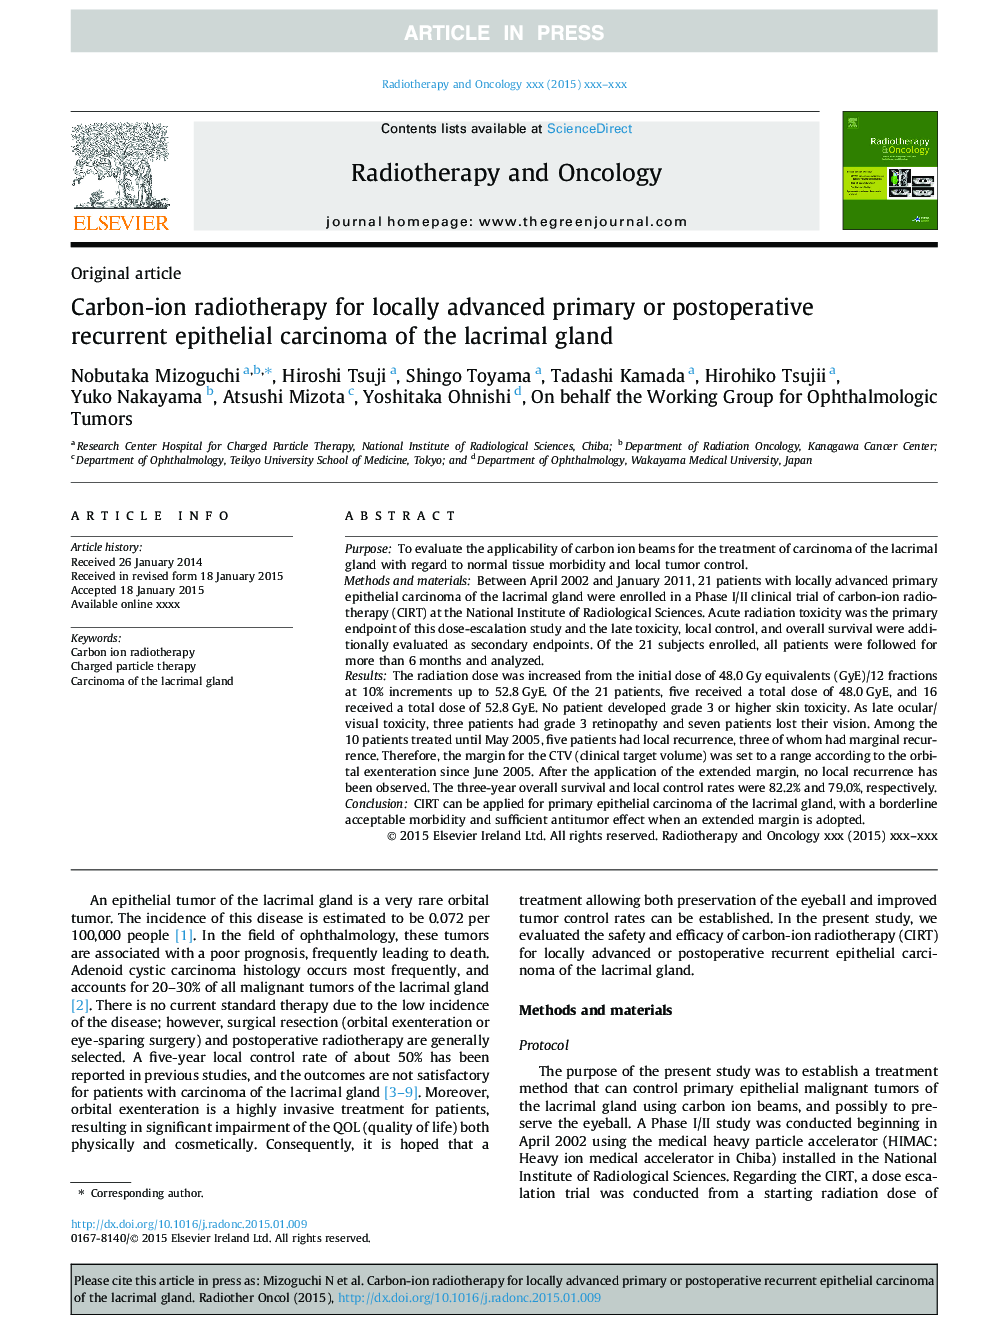 Carbon-ion radiotherapy for locally advanced primary or postoperative recurrent epithelial carcinoma of the lacrimal gland